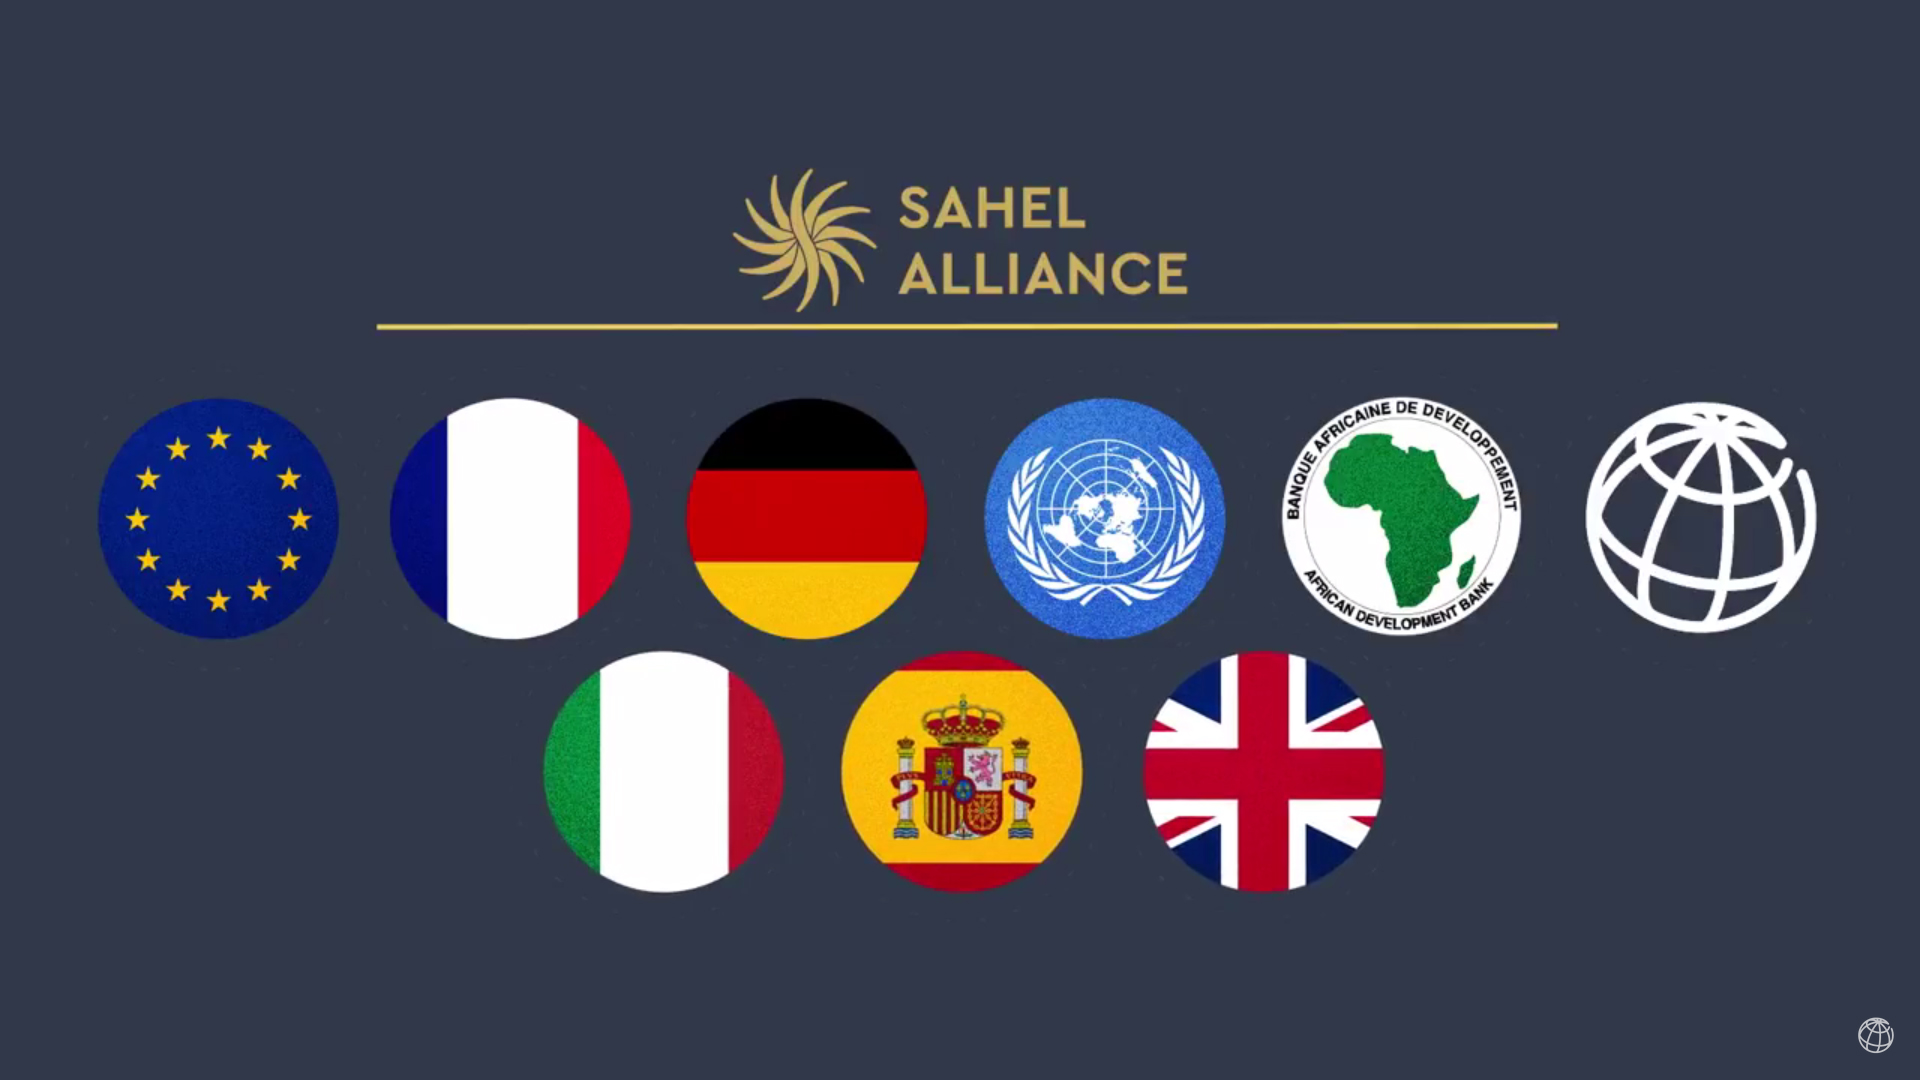 Standbild aus dem Video "The Sahel Alliance: Working Together to Tackle Shared Problems"